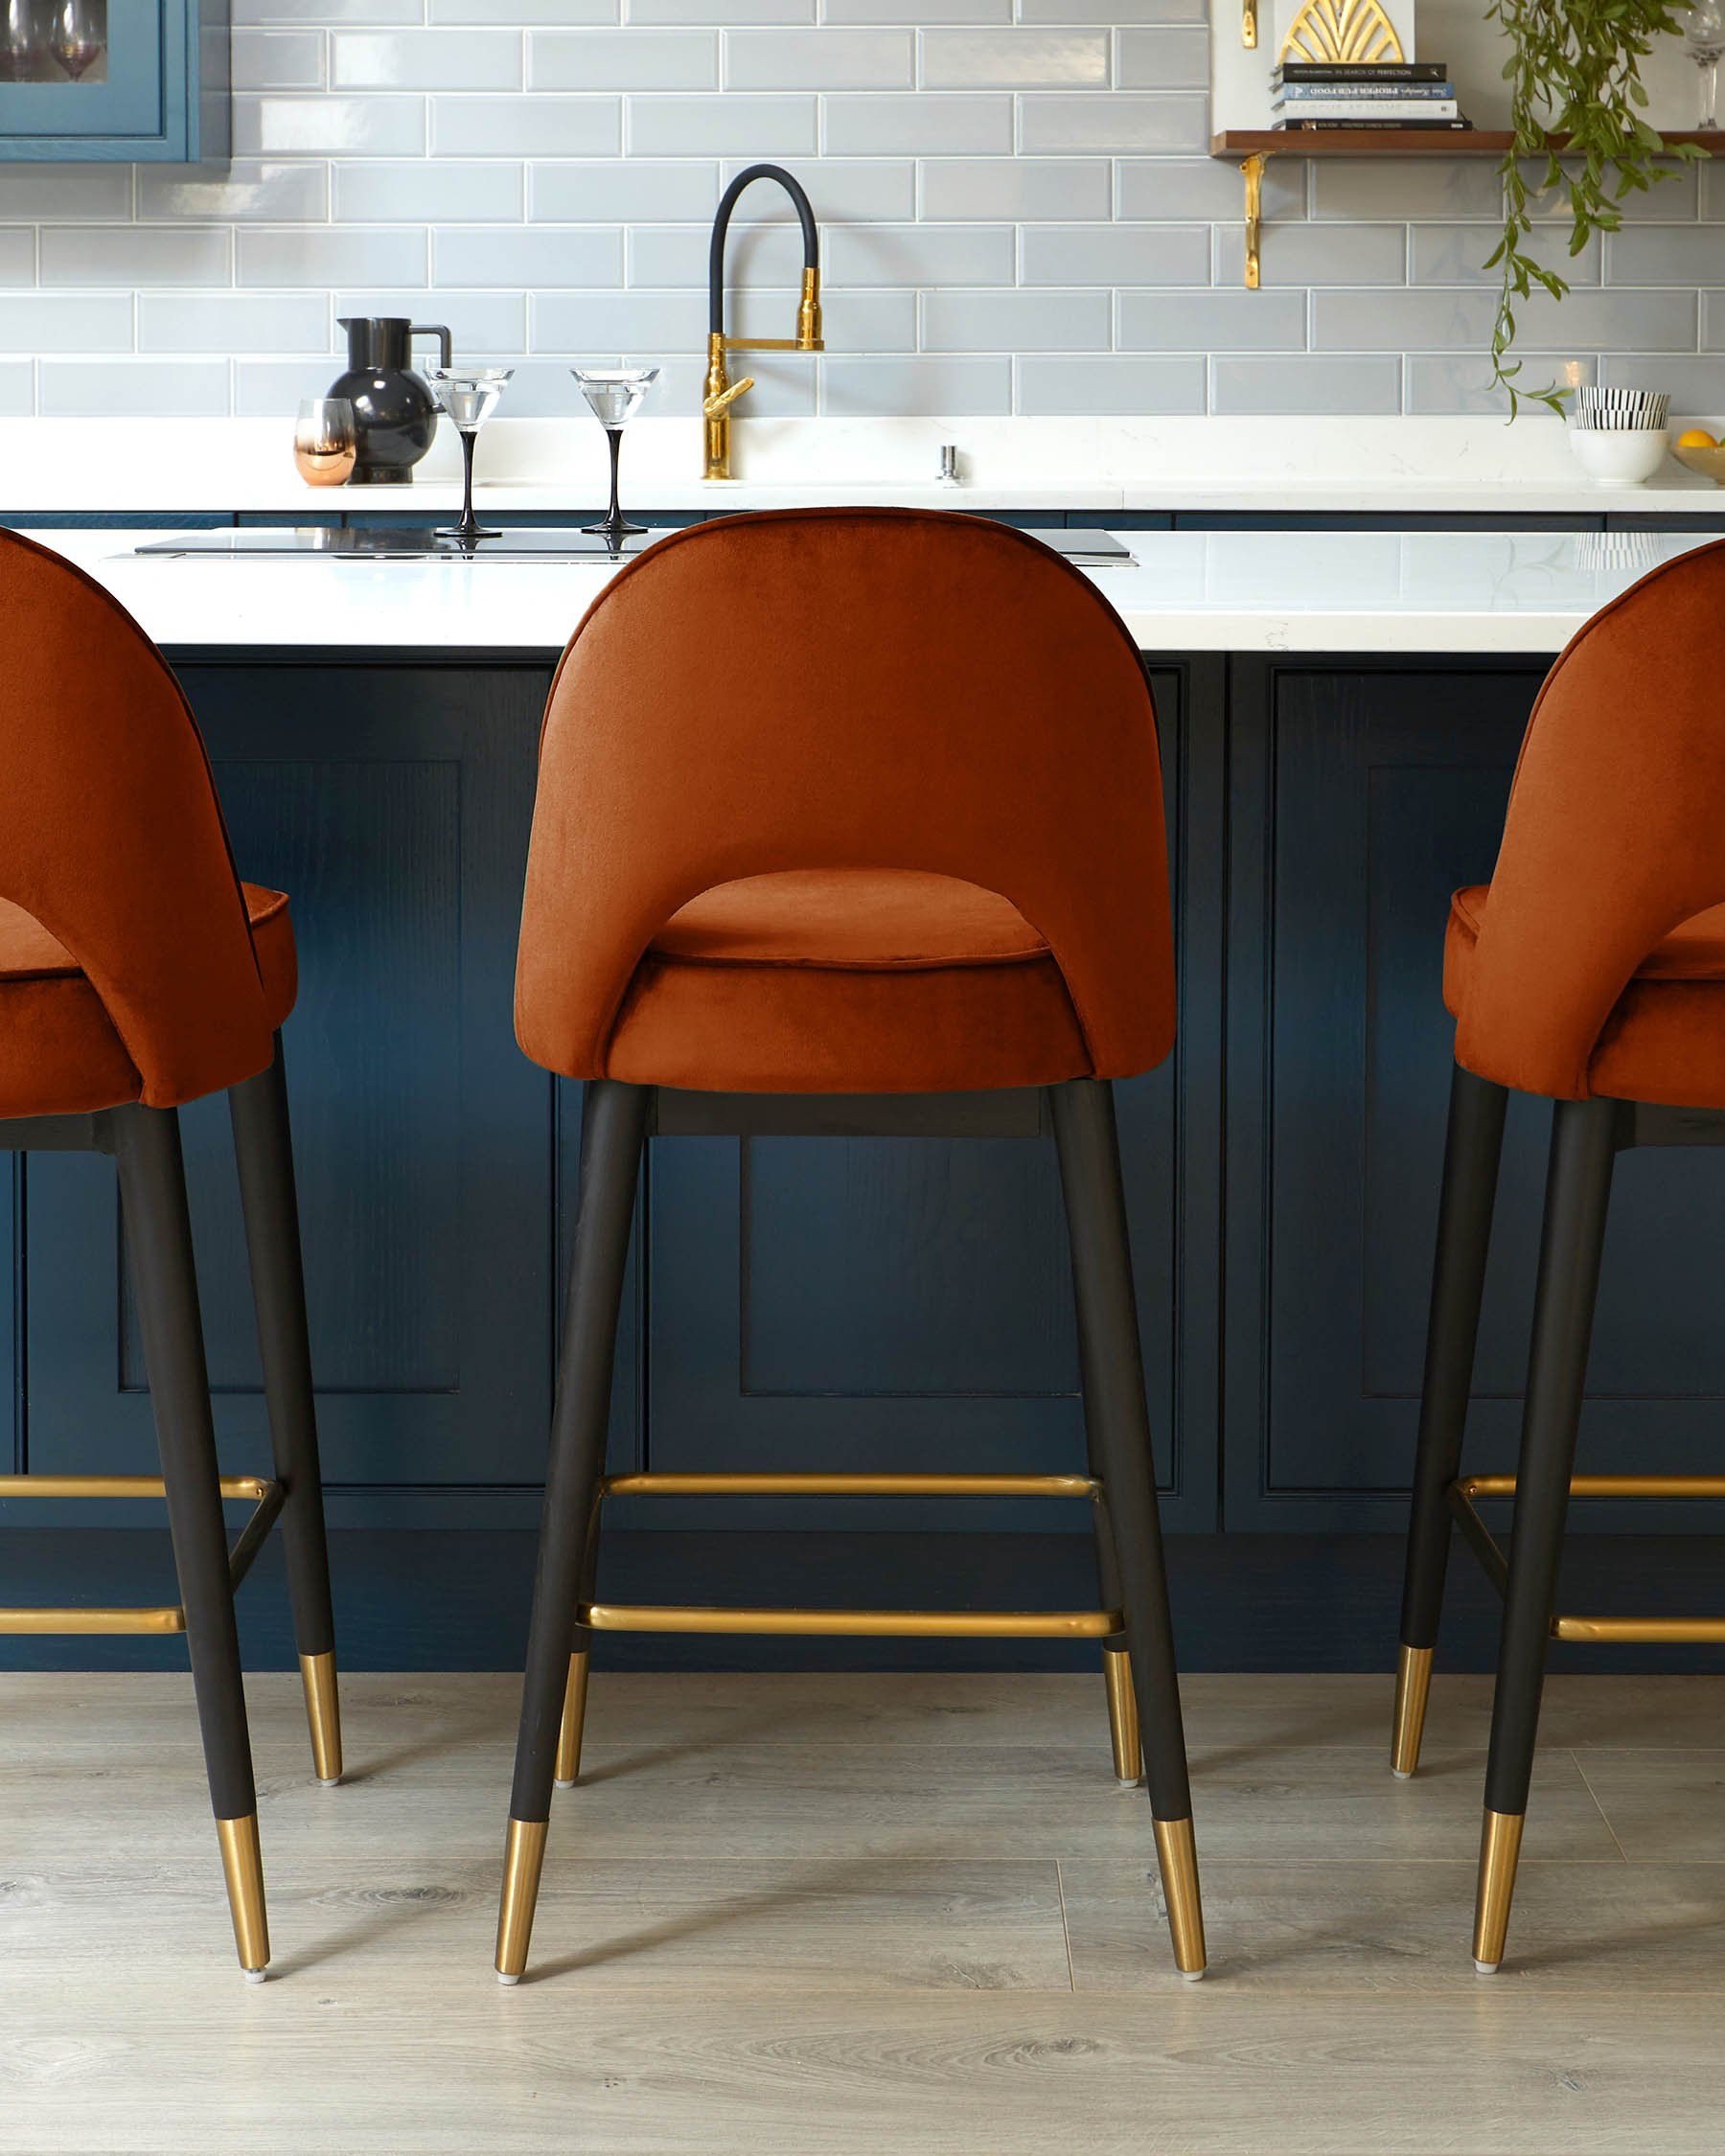 The Ultimate Guide to Finding the Perfect Kitchen Stools for Your Space